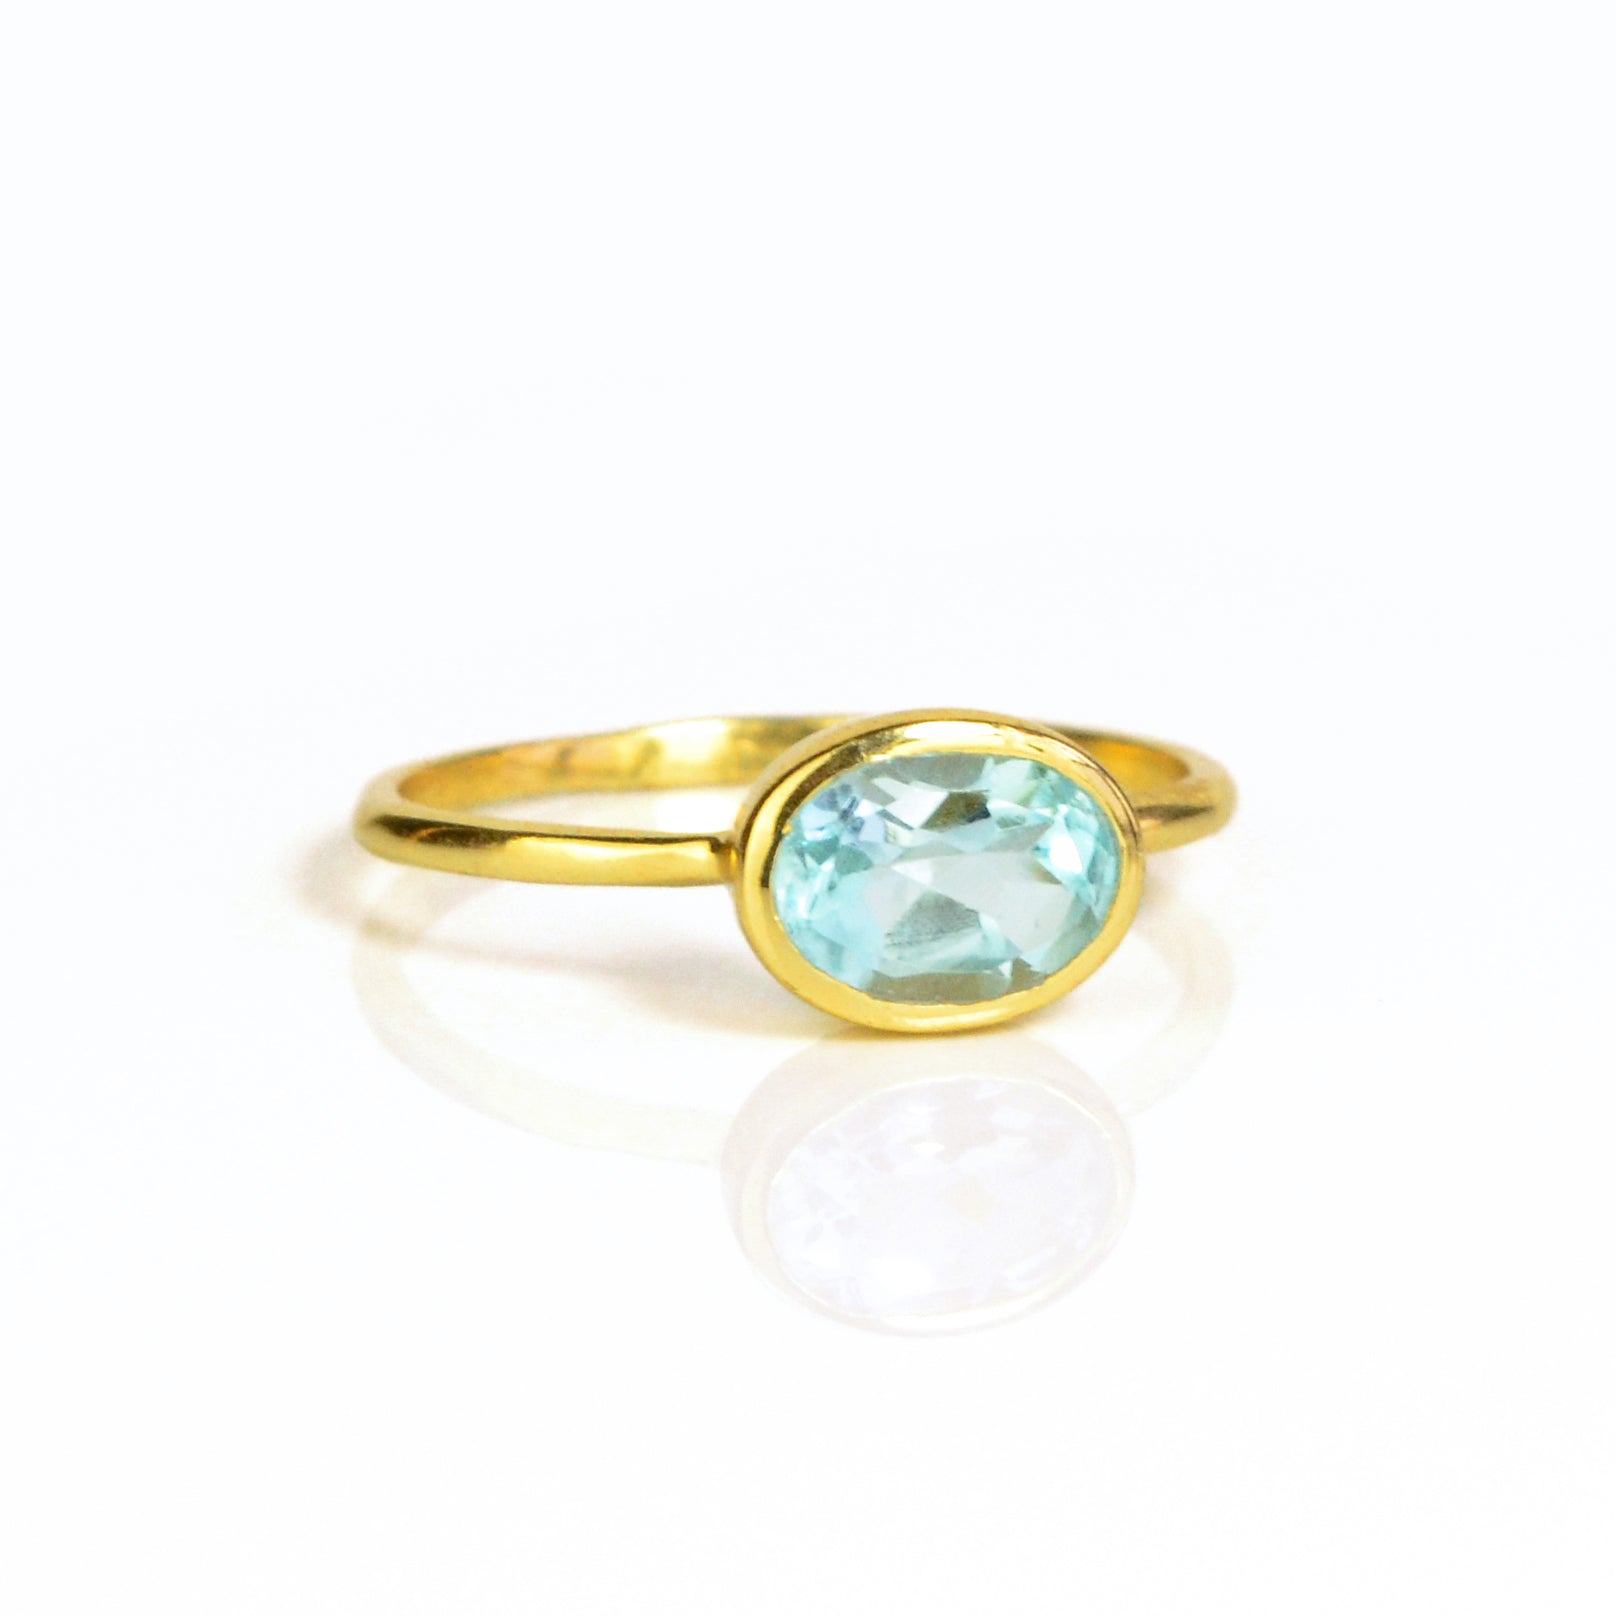 Small Oval Blue Topaz Ring : December Birthstone - Danique Jewelry